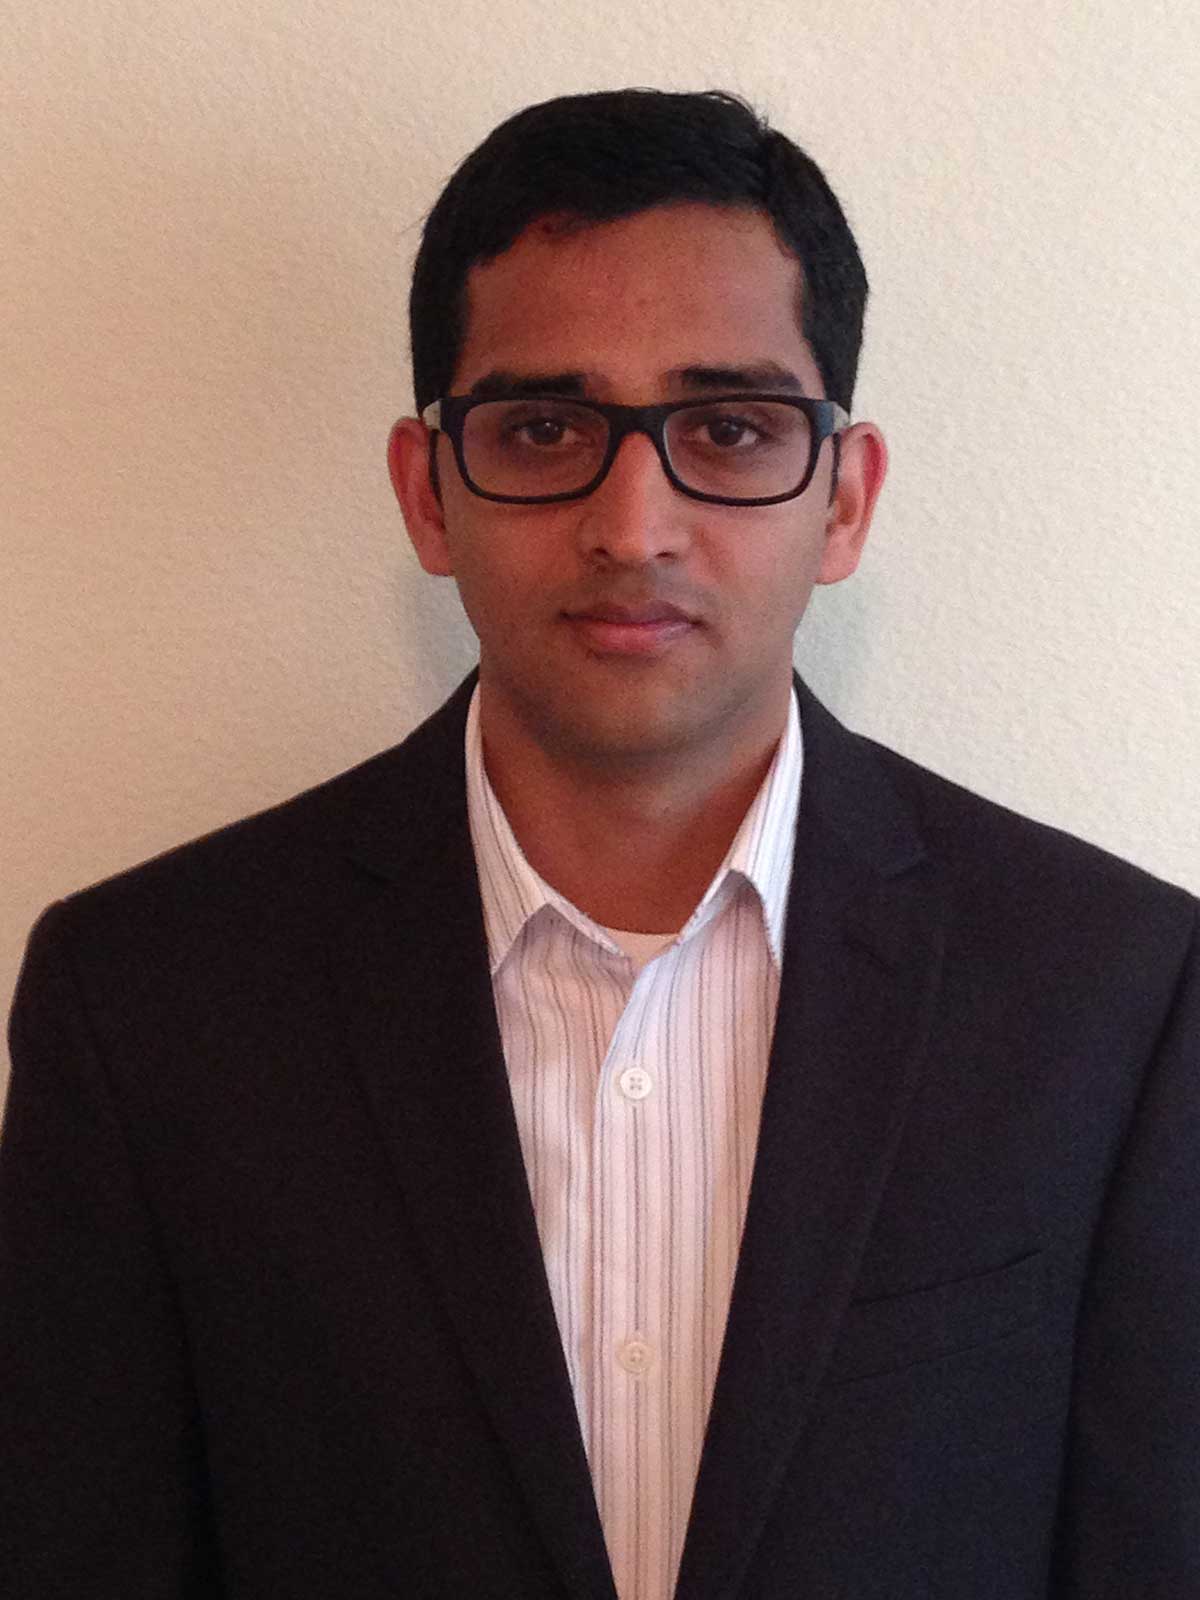 Speaker: Kushal Seth, VP of Technology and Engineering for Gradiant Energy Services